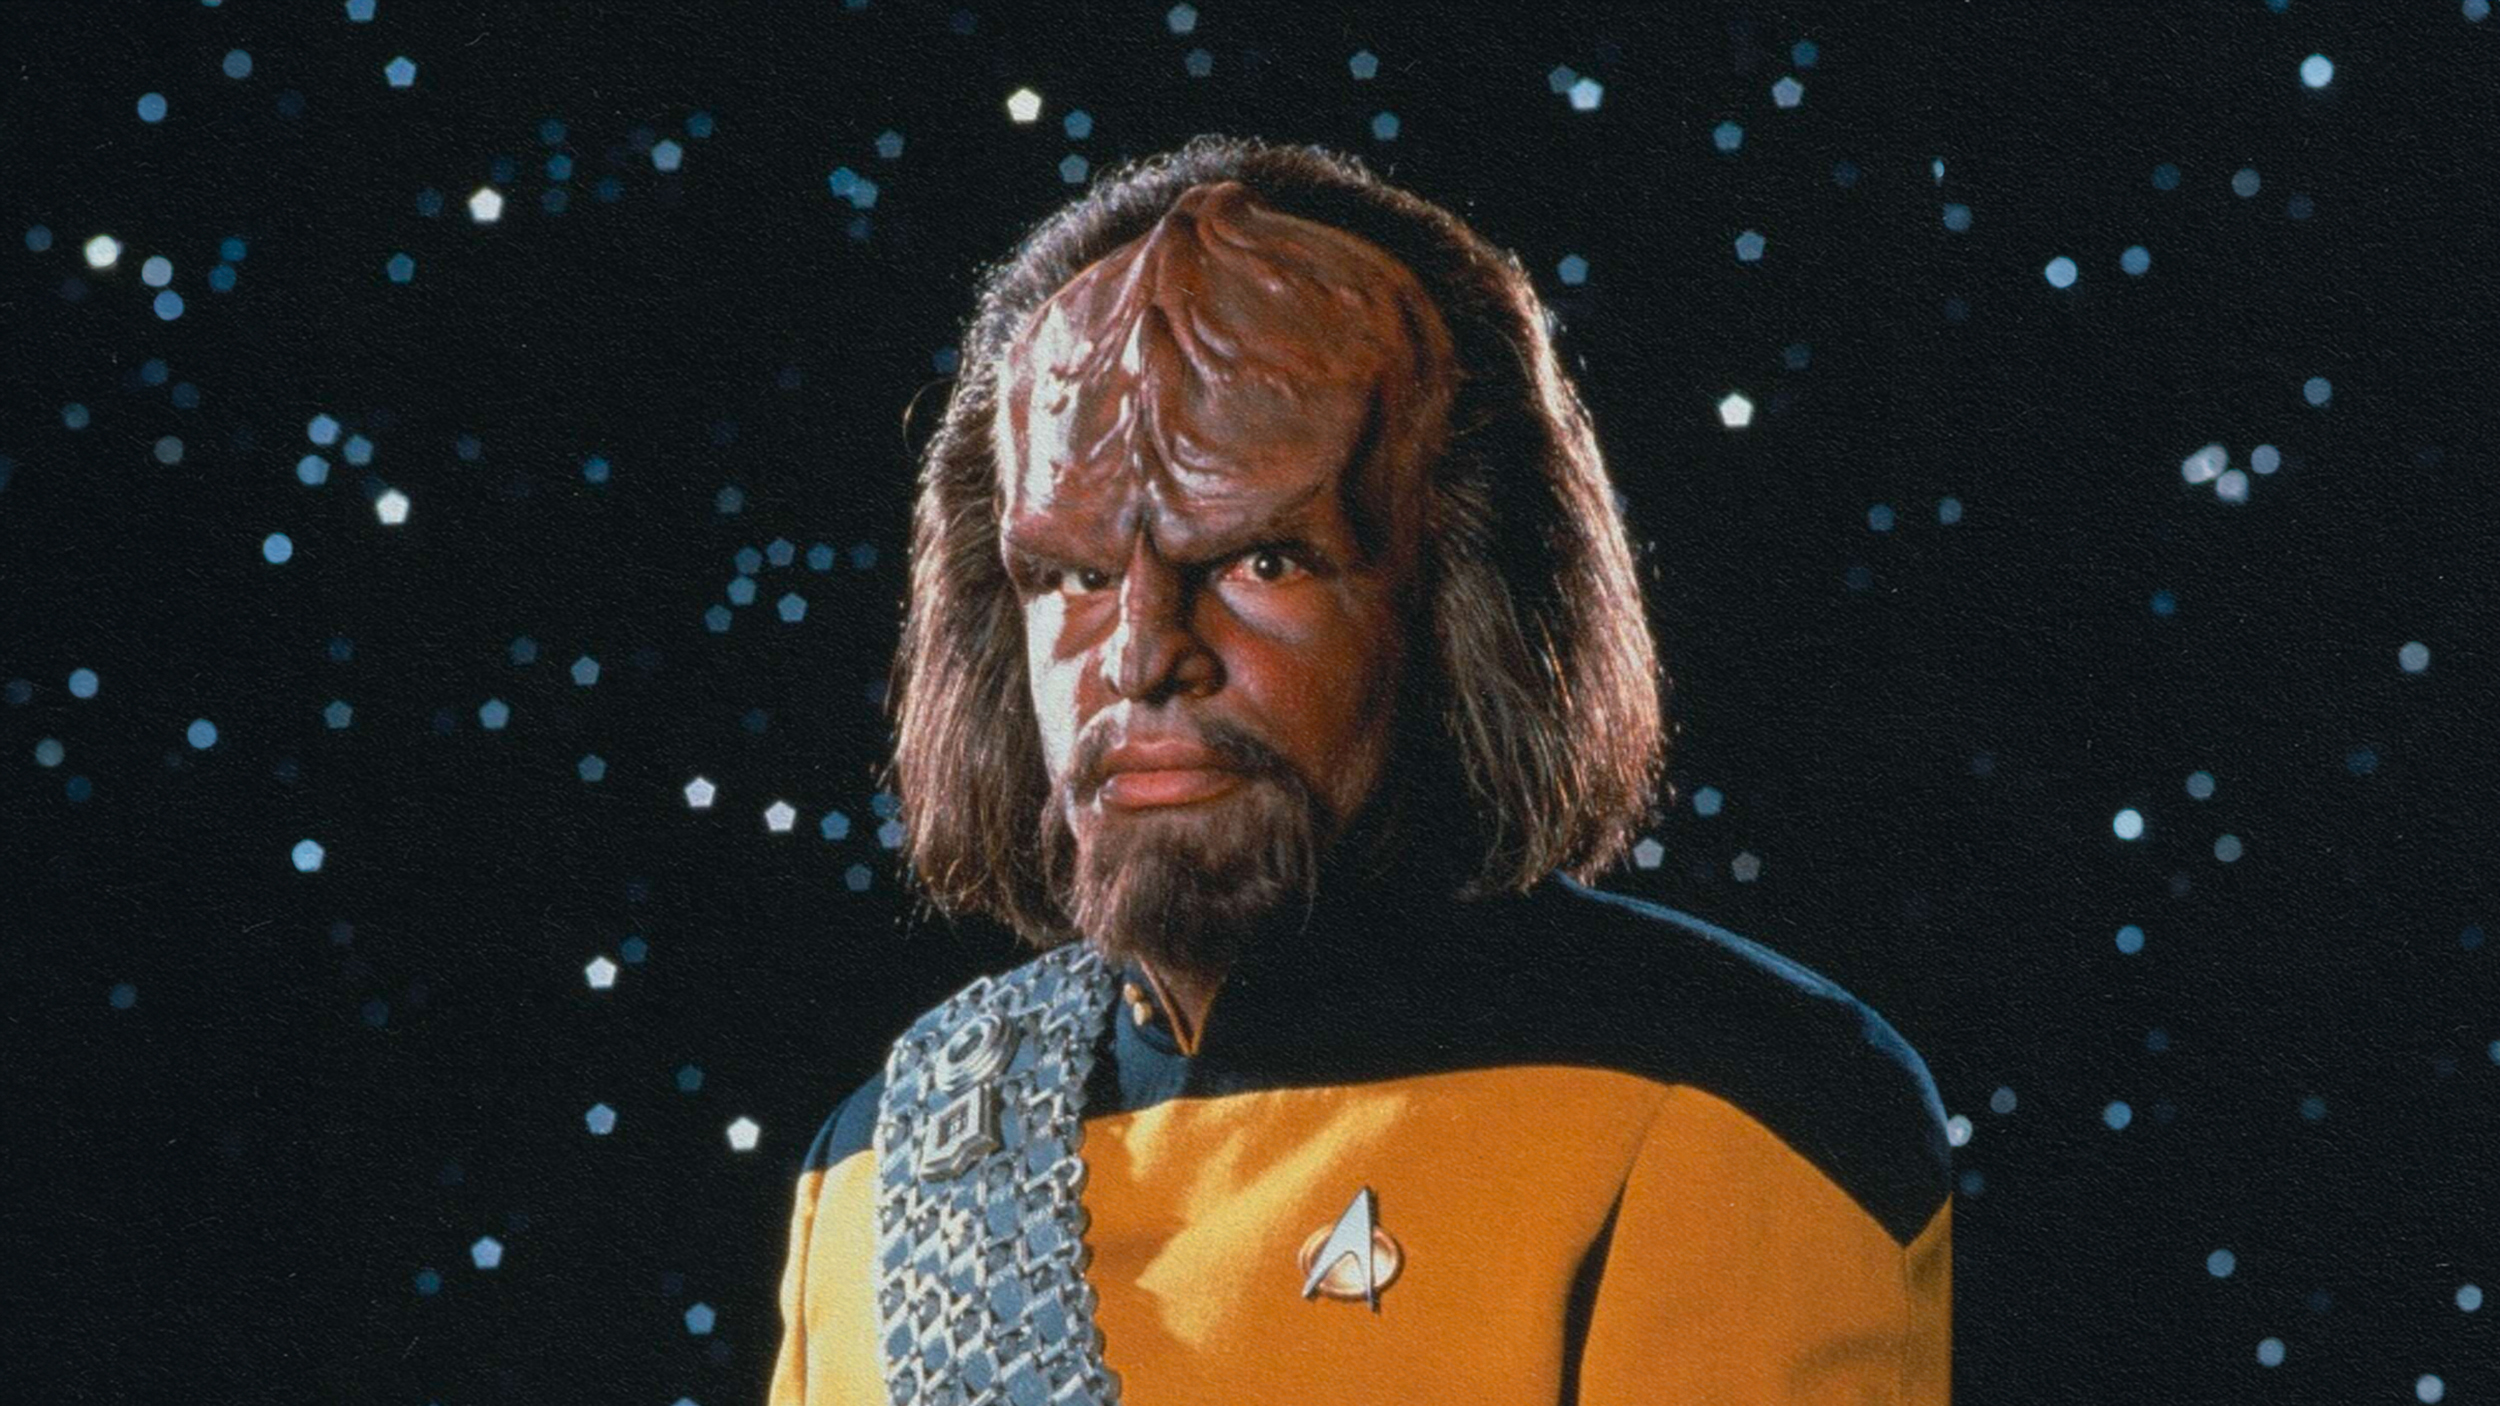 A character in a starfleet uniform with a distinctive ridged forehead, who speaks invented languages, stands against a backdrop of stars.